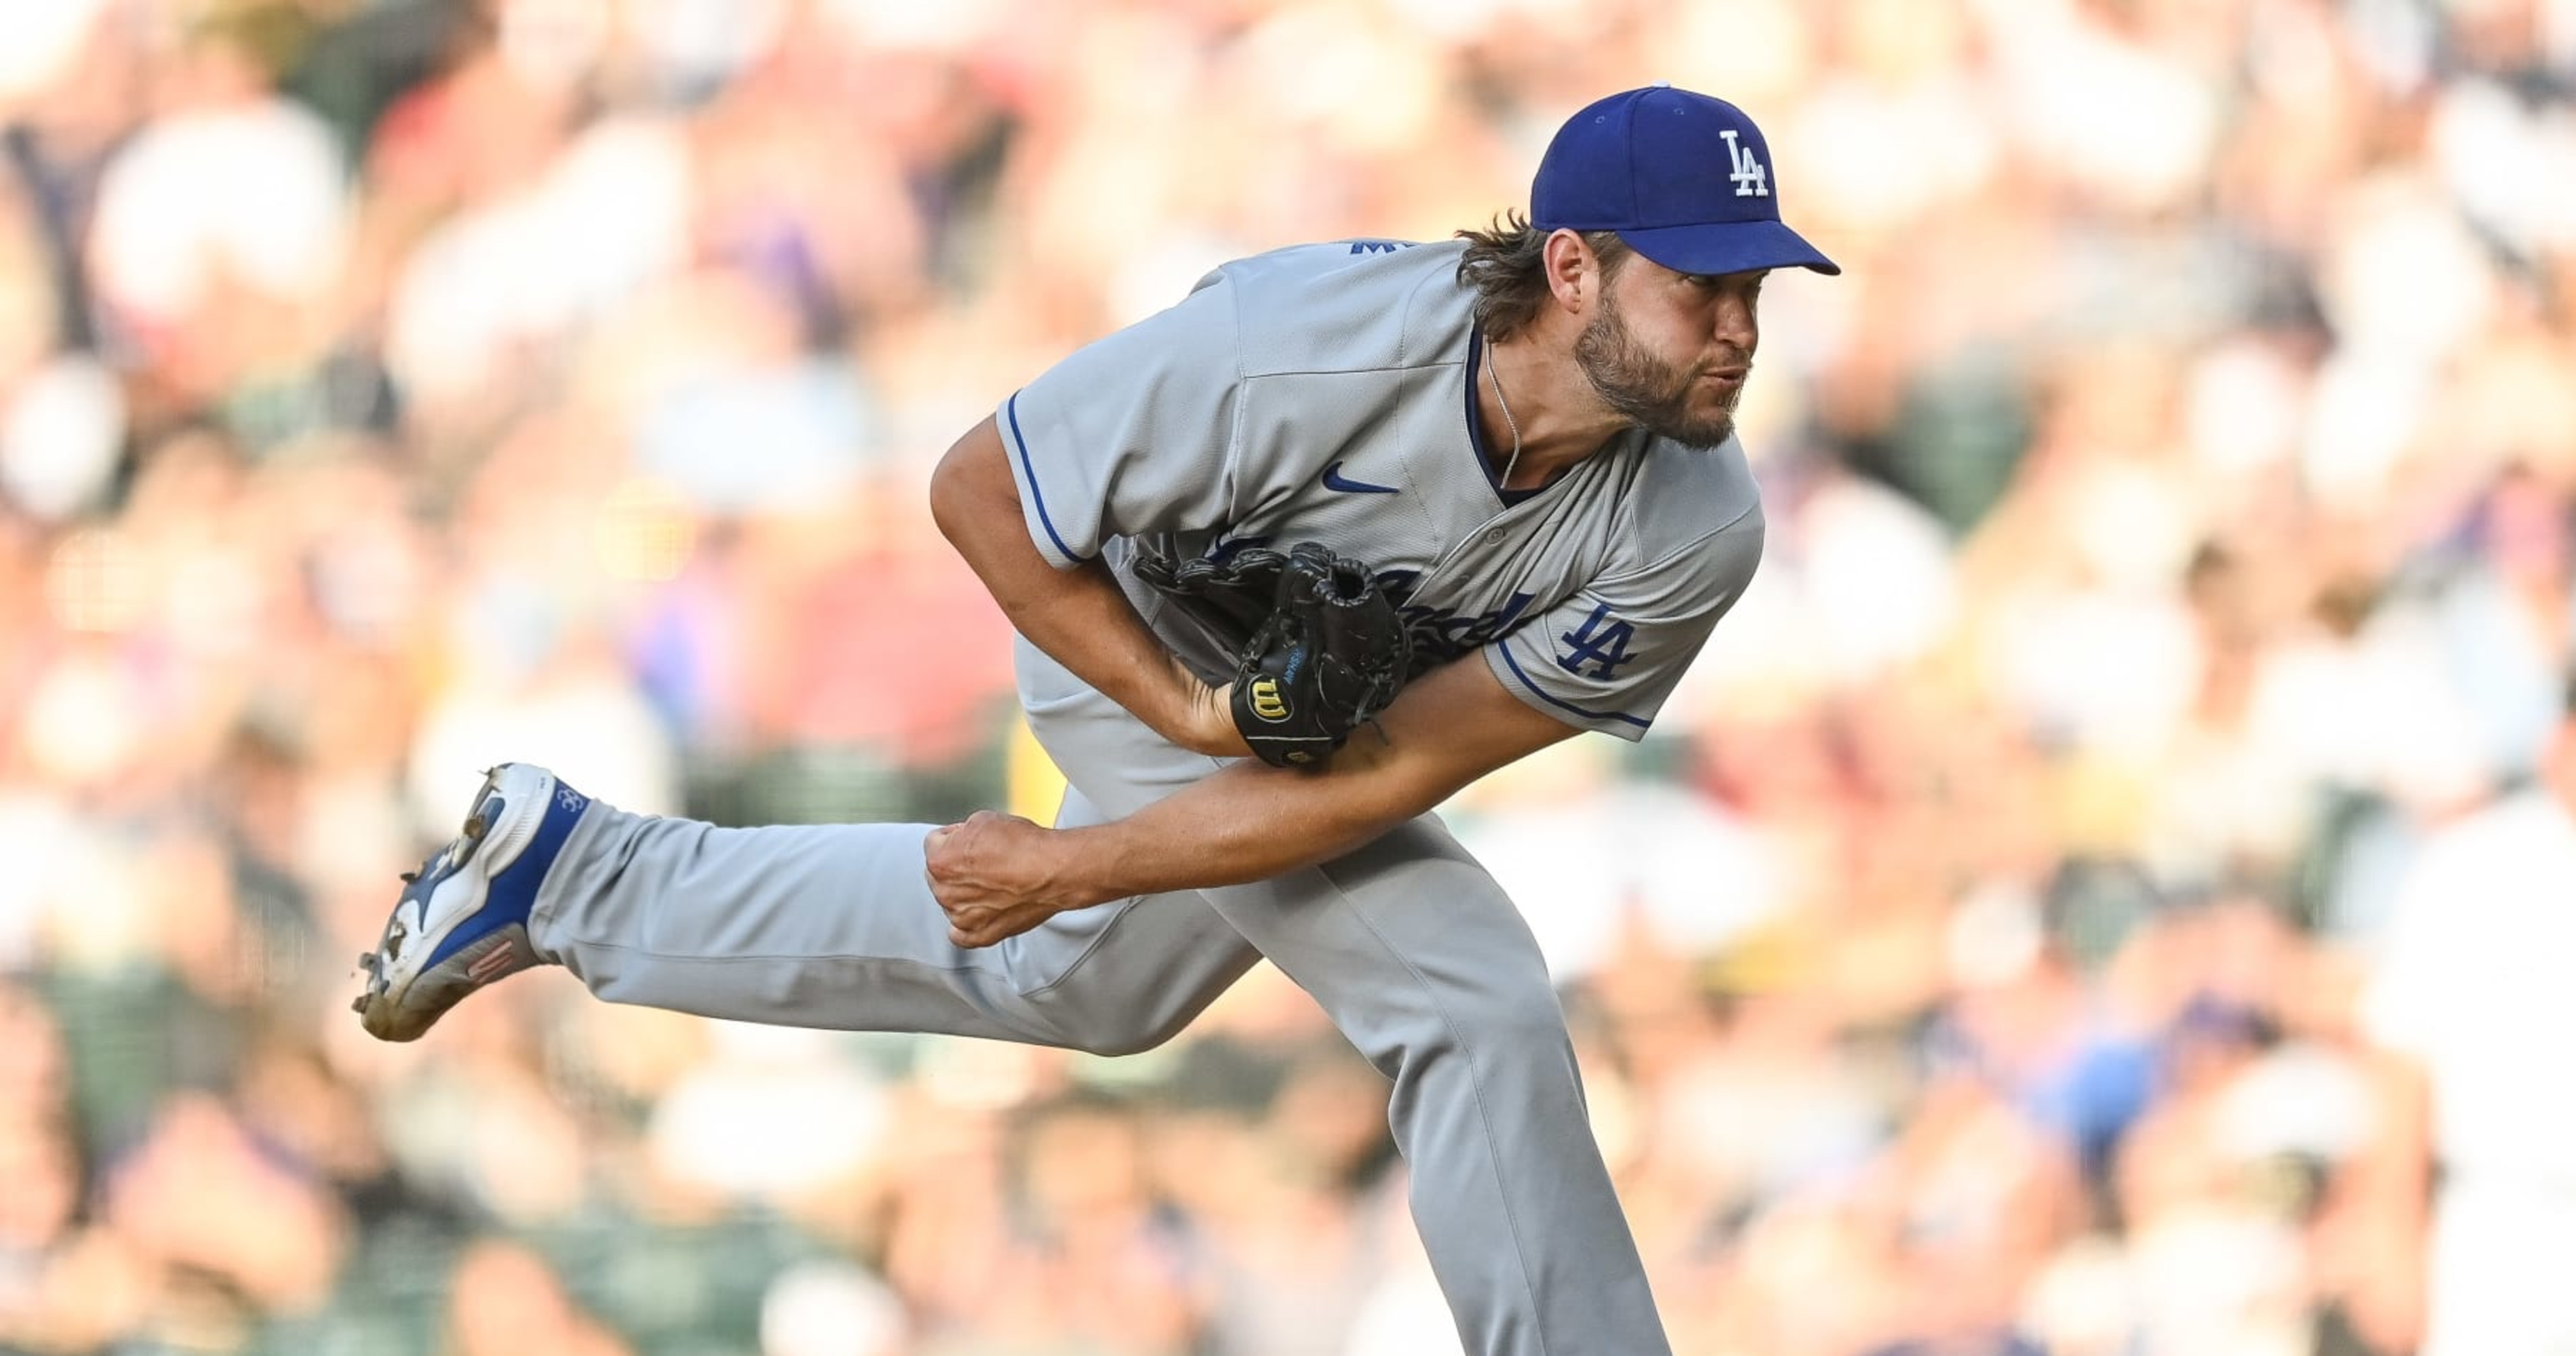 Dodgers pitcher Clayton Kershaw says sore left shoulder will